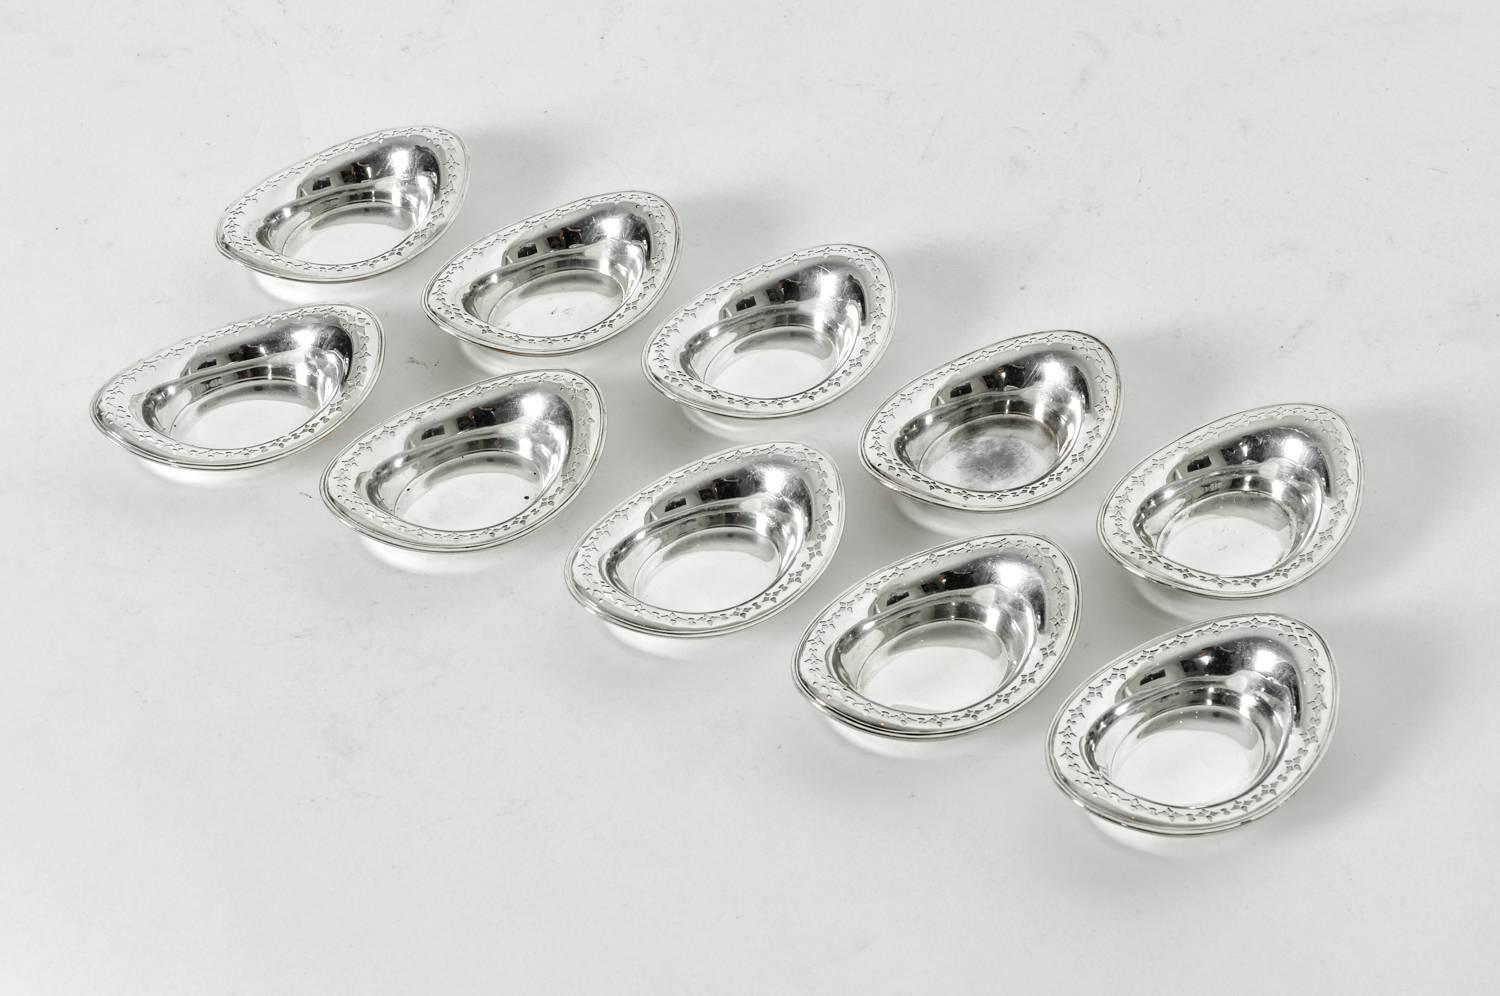 Antique sterling silver Tiffany table condiments / nut disk set of ten pieces. All in excellent condition. Each piece measure 4 inches long X 2.7 inches width.